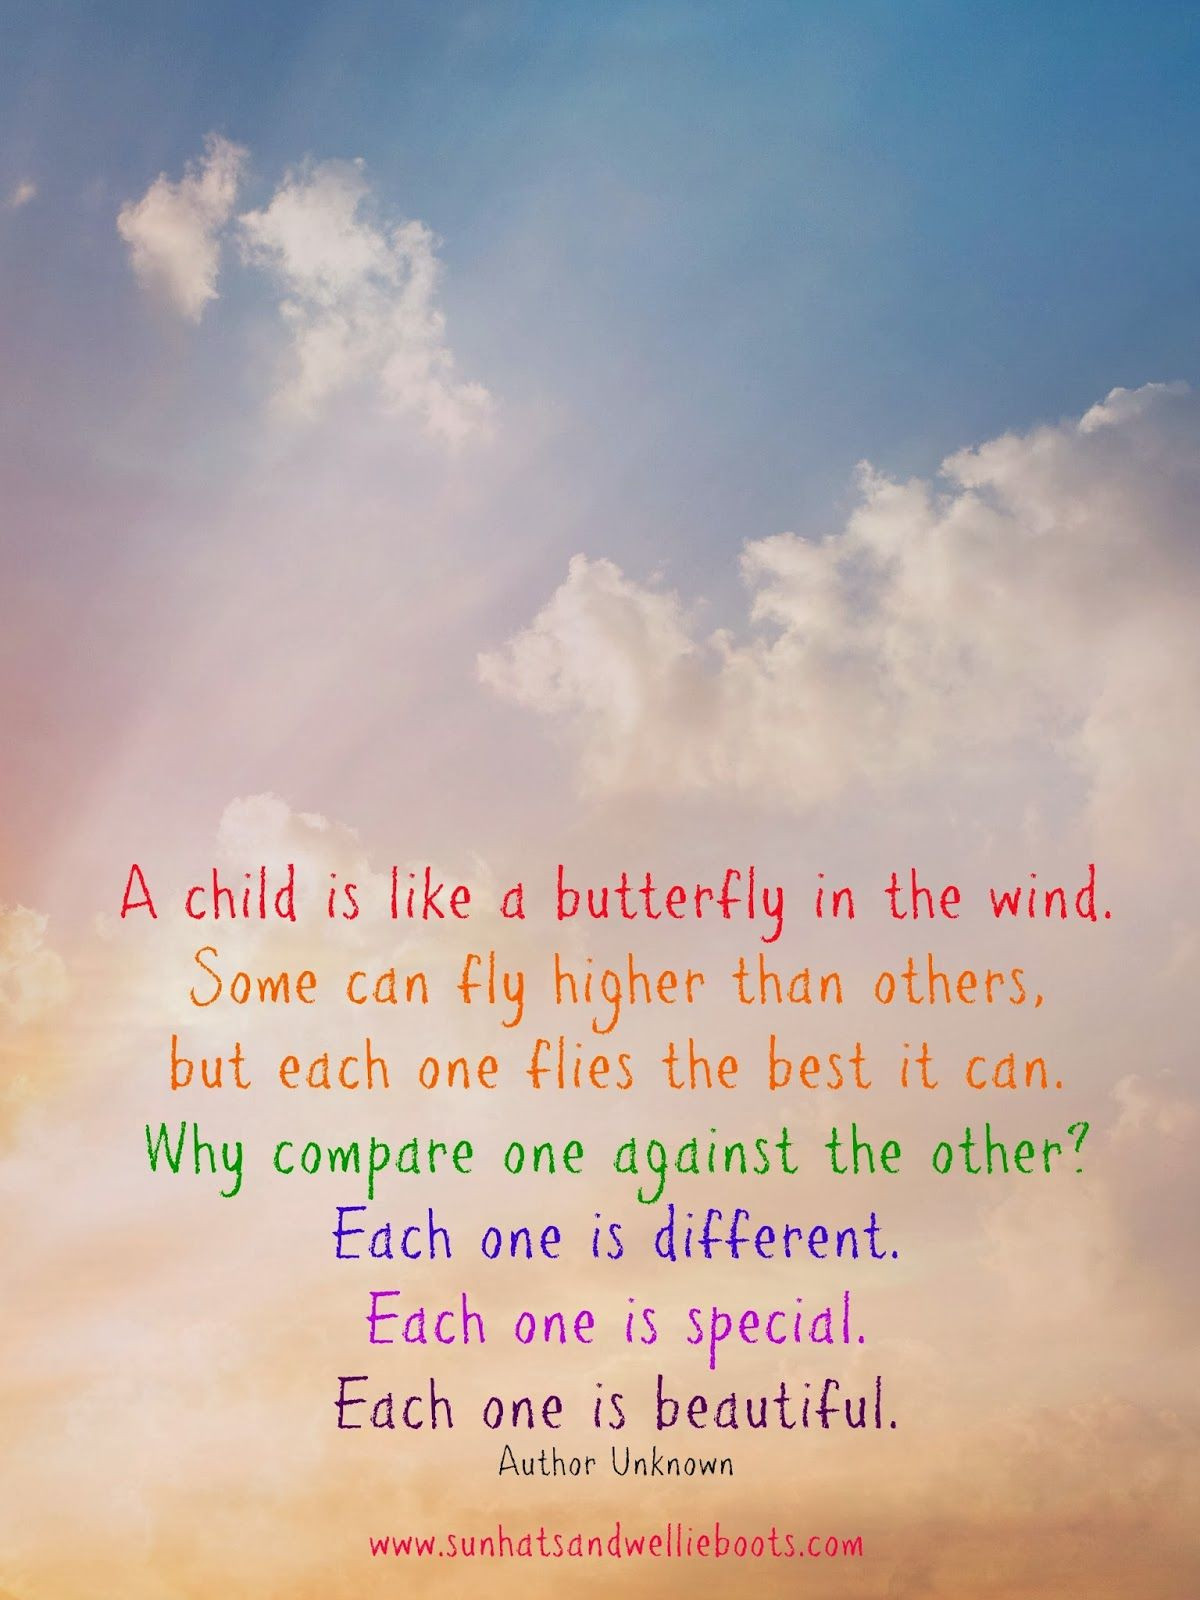 Butterfly Quotes For Kids
 A Child is like a Butterfly in the Wind